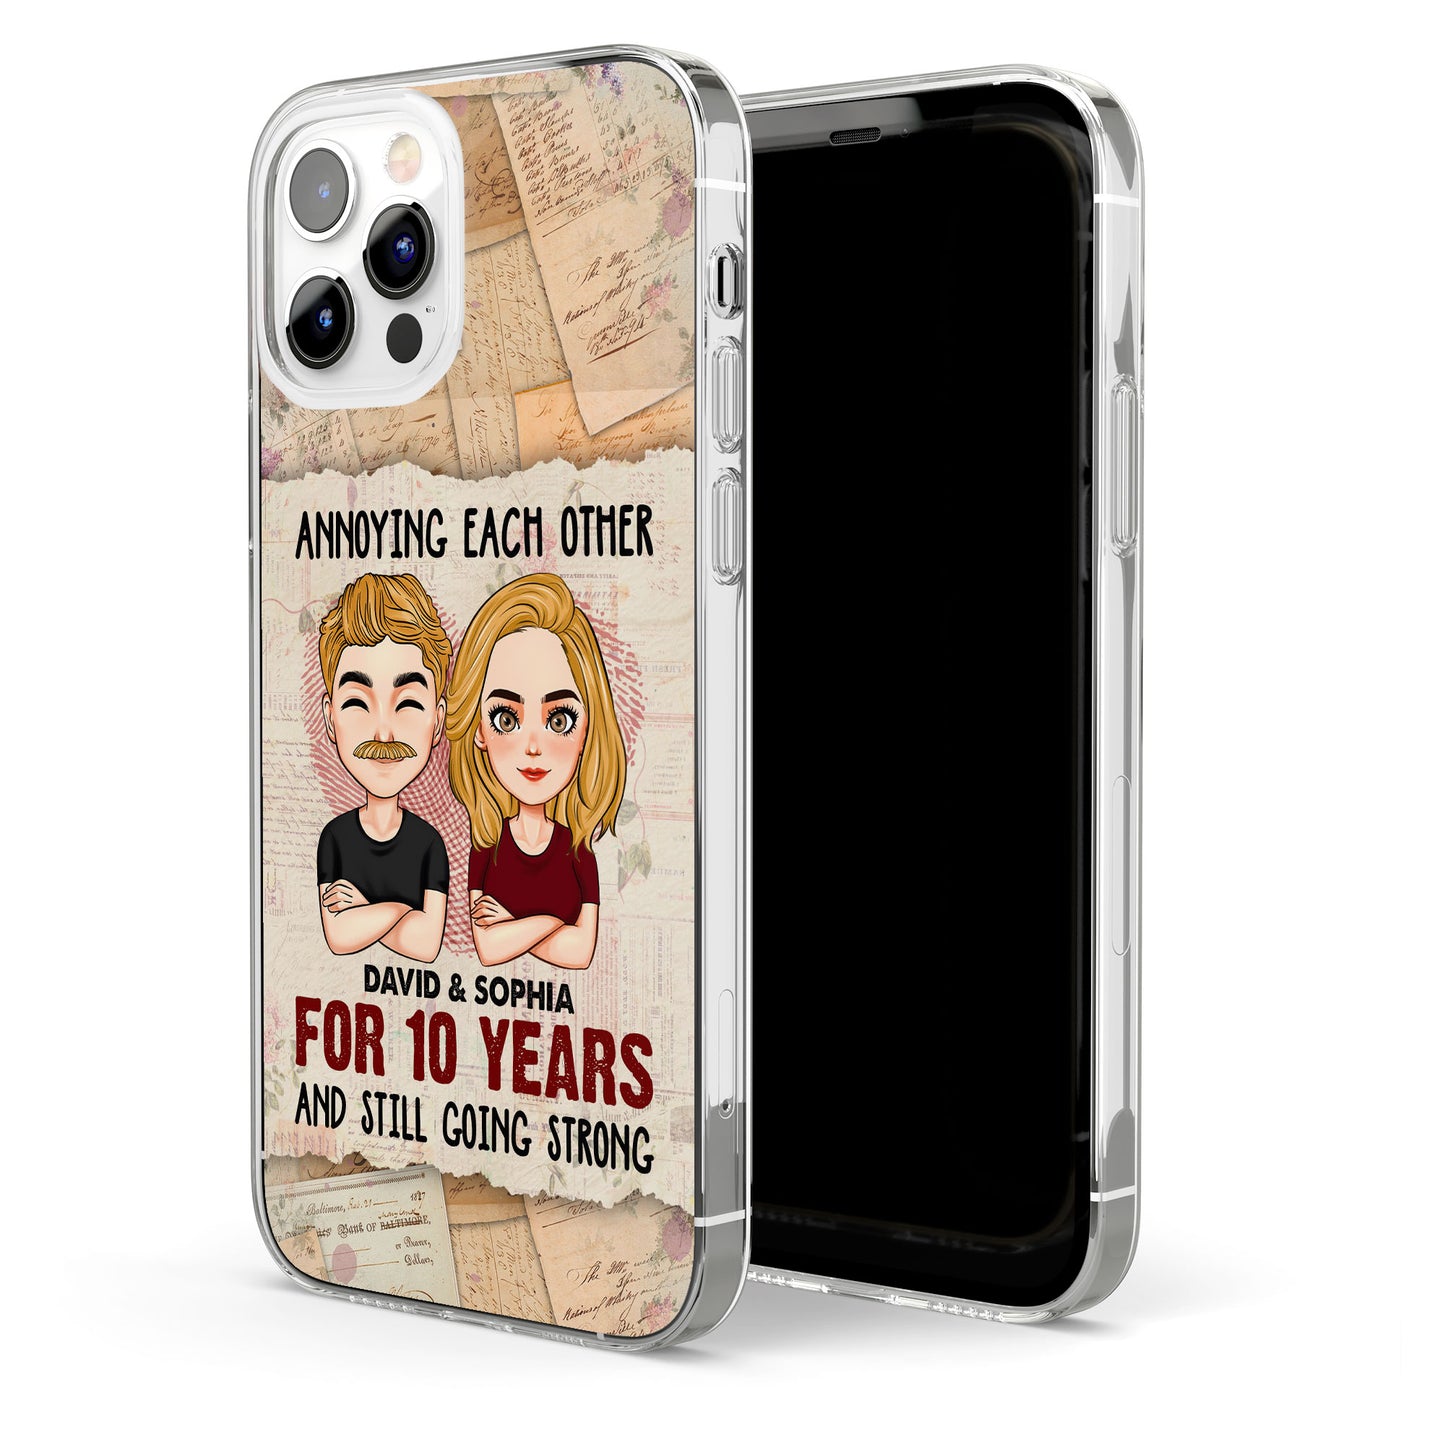 We're Going Strong - Personalized Clear Phone Case